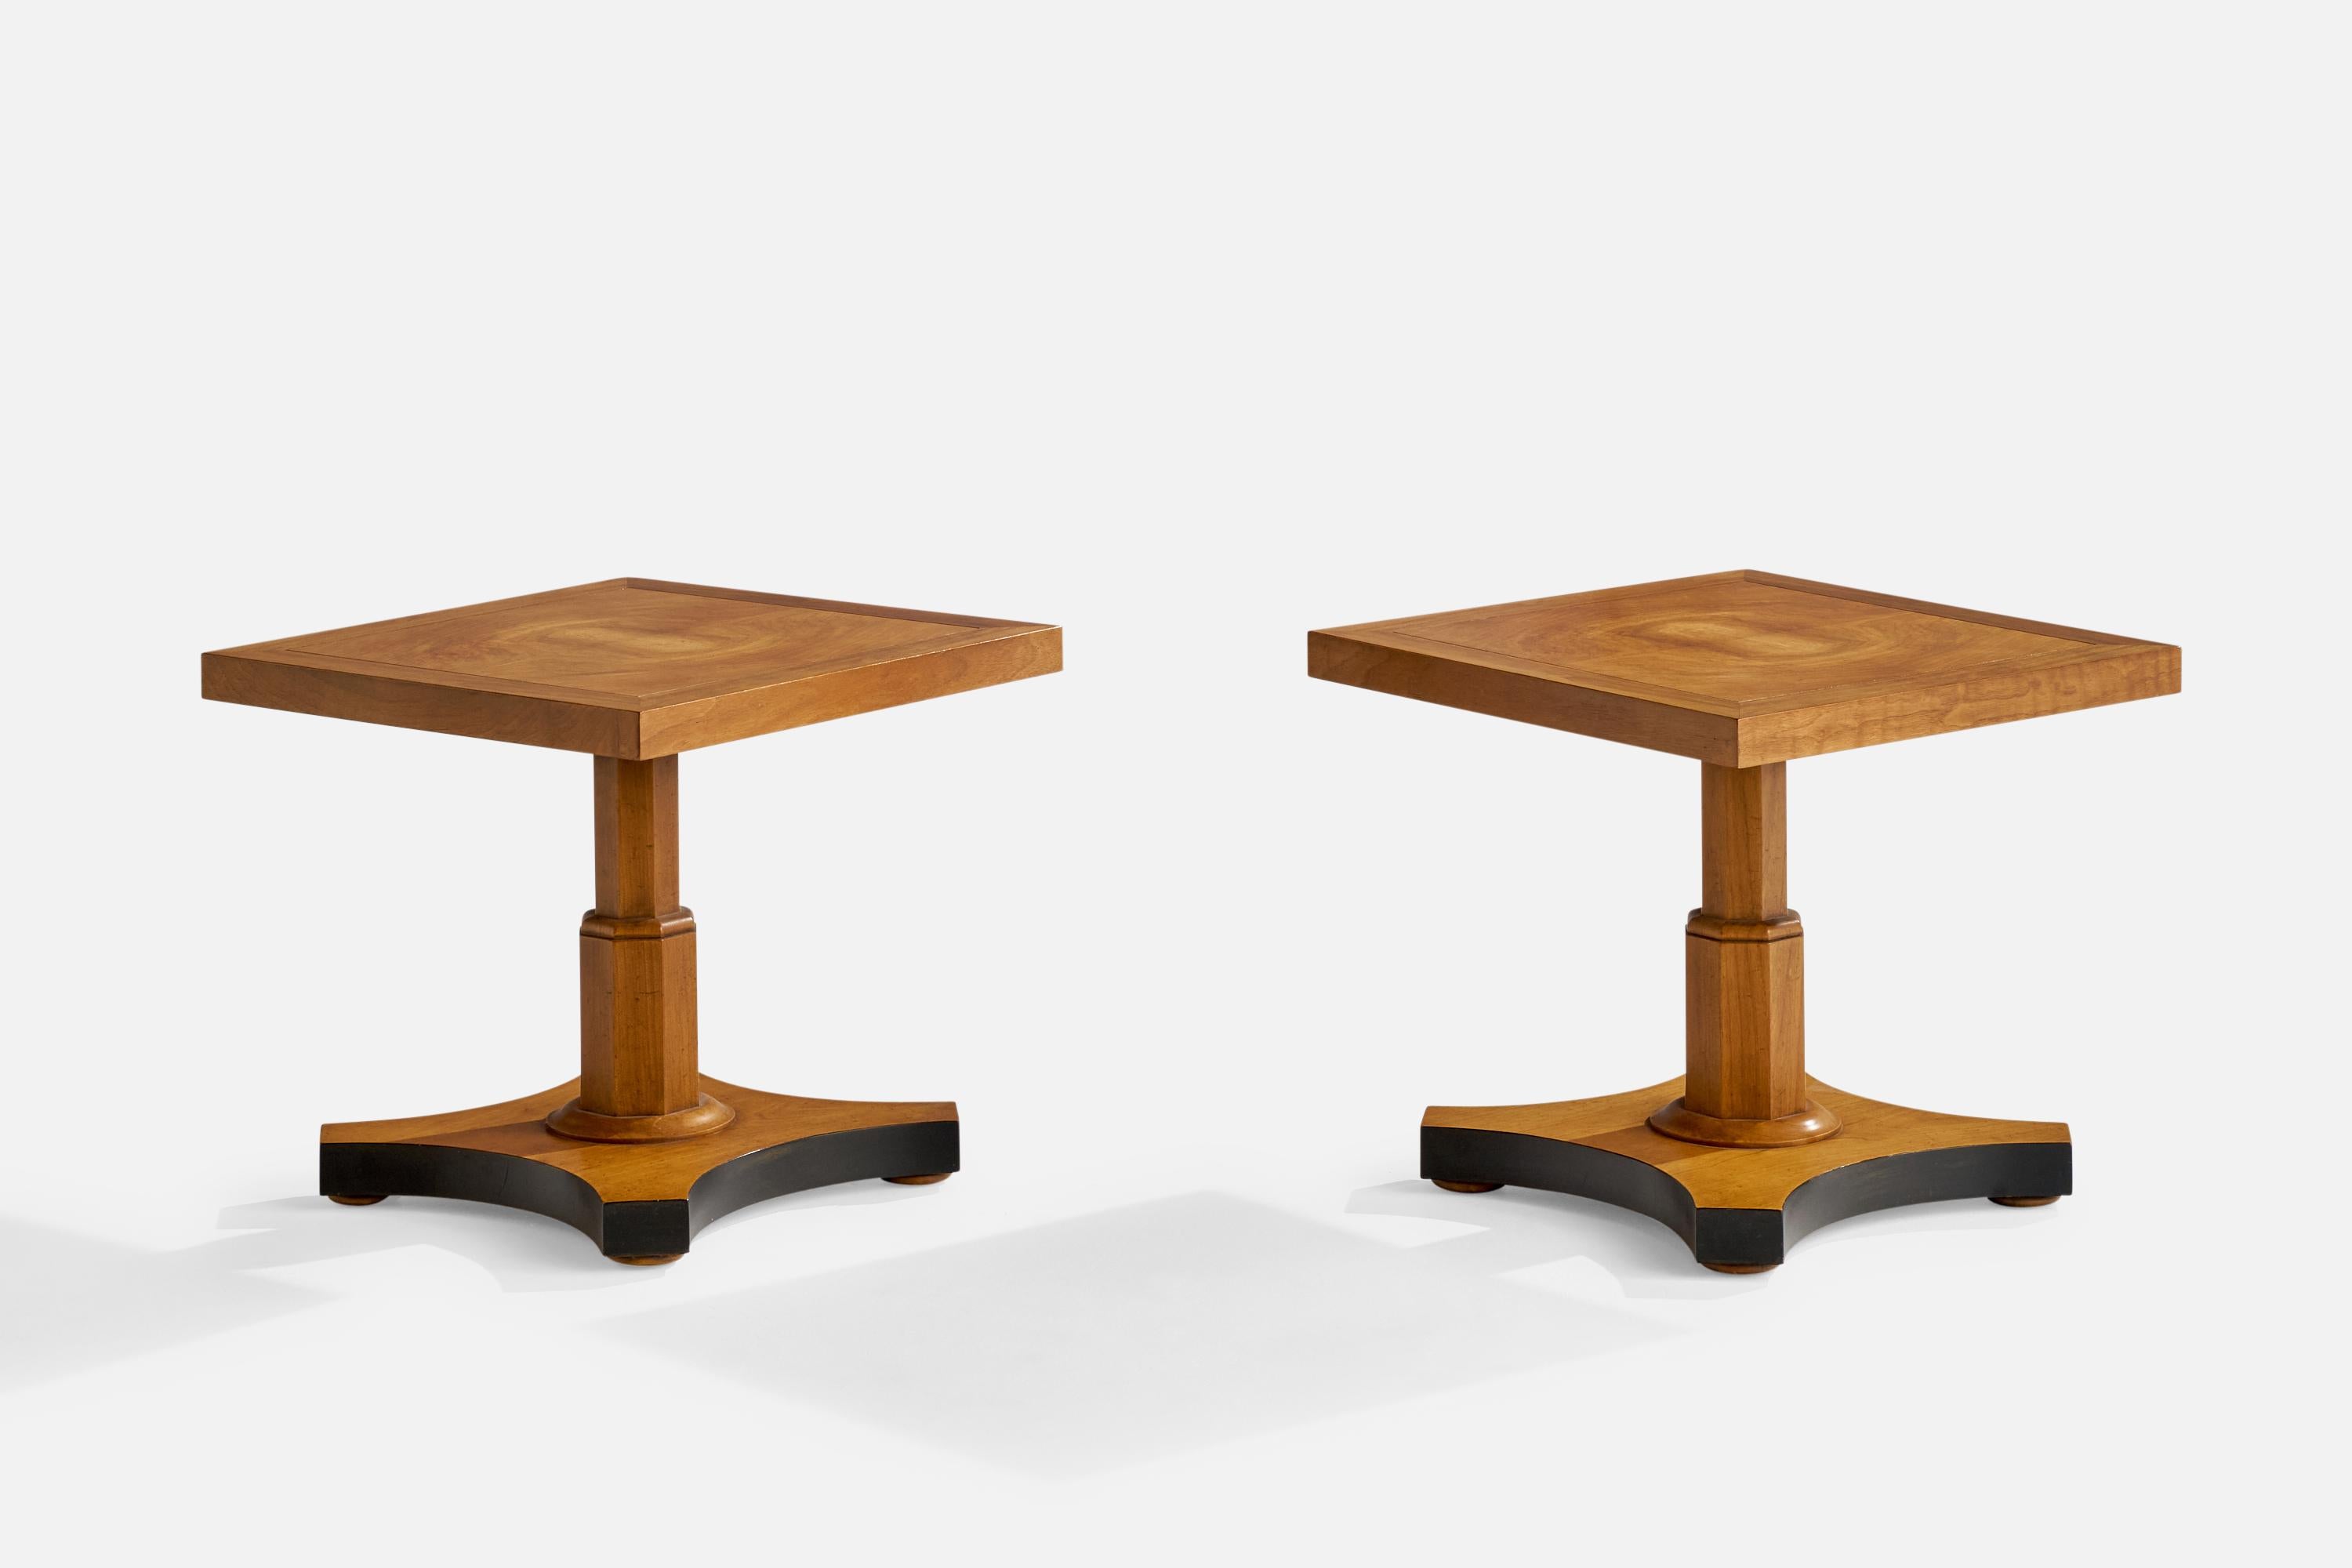 A pair of semi black-painted walnut side tables designed and produced by Baker Furniture, USA, c. 1940s.